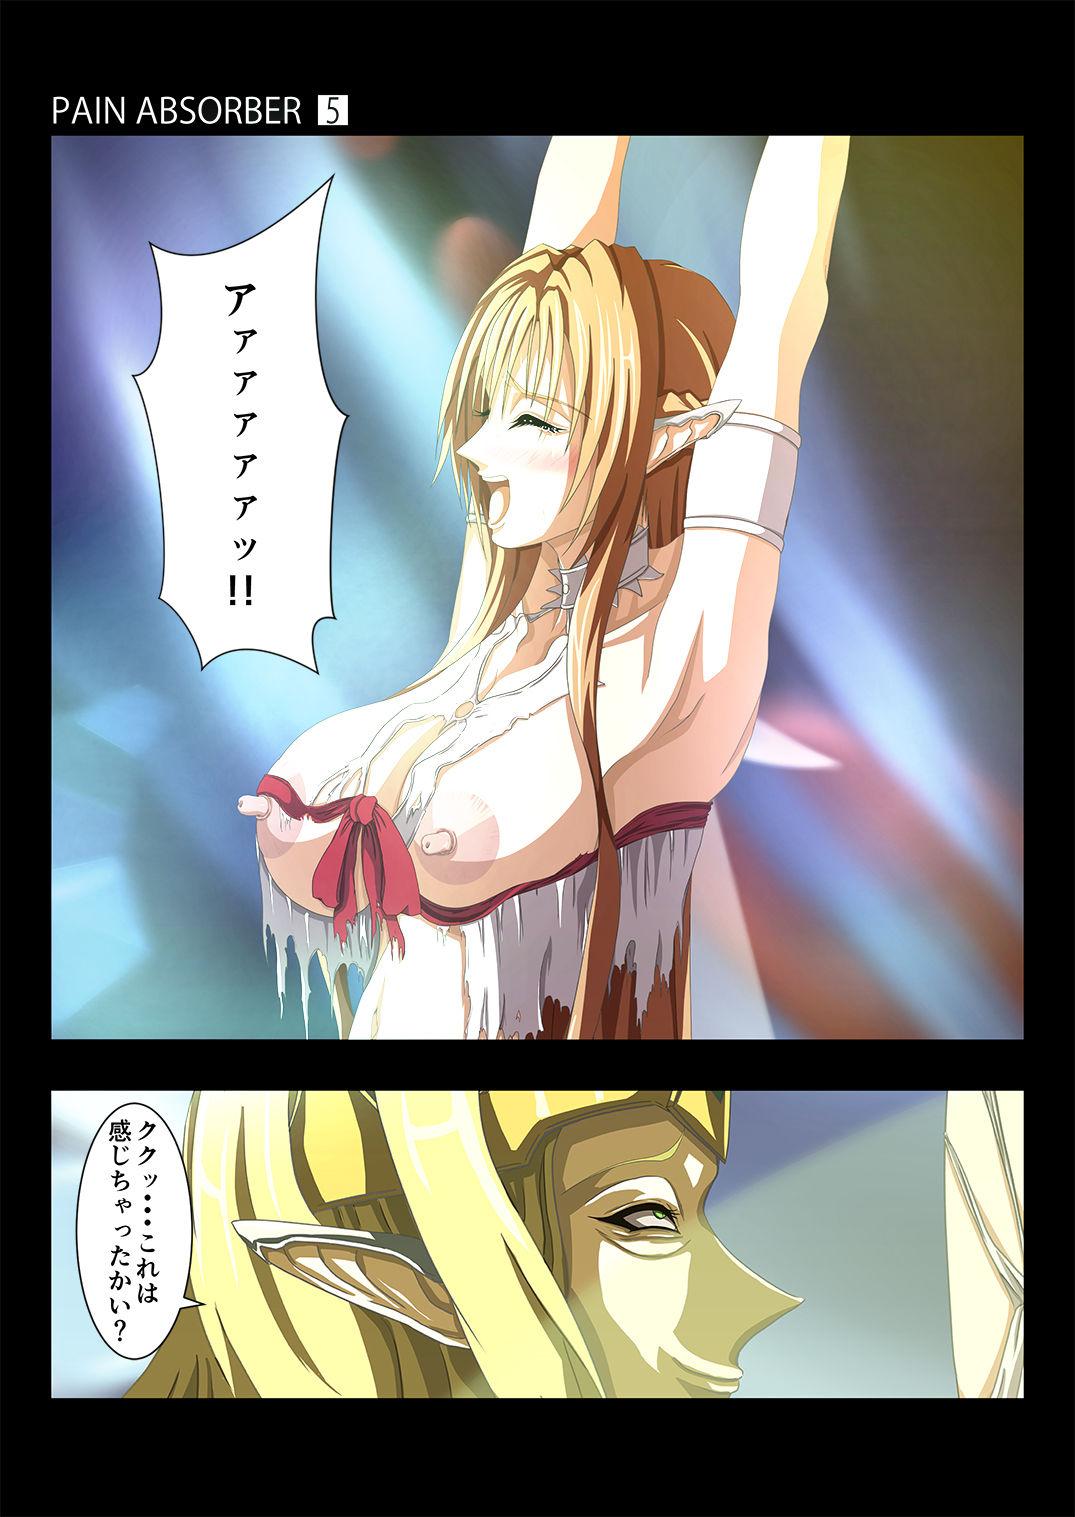 Pussyfucking PAIN ABSORBER 5 - Sword art online Tease - Page 6